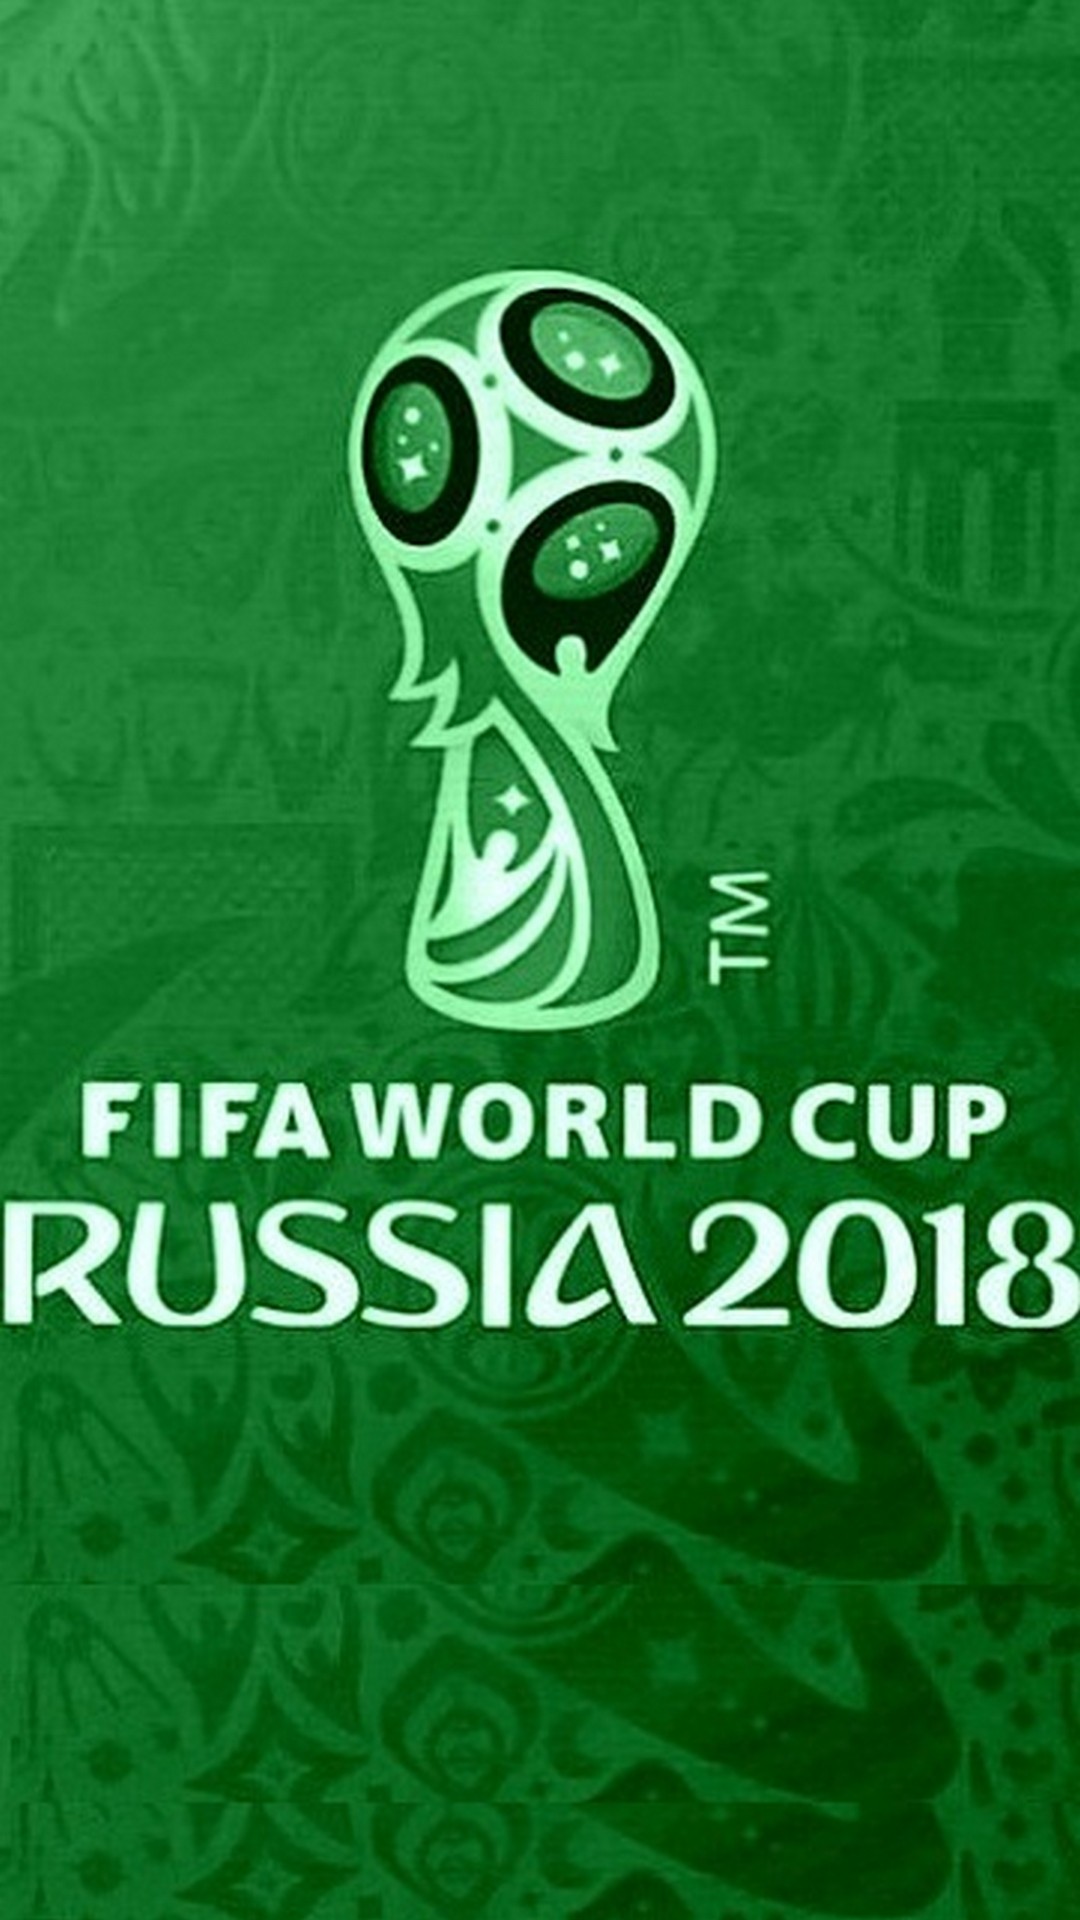 Android Wallpaper 2018 World Cup with HD resolution 1080x1920